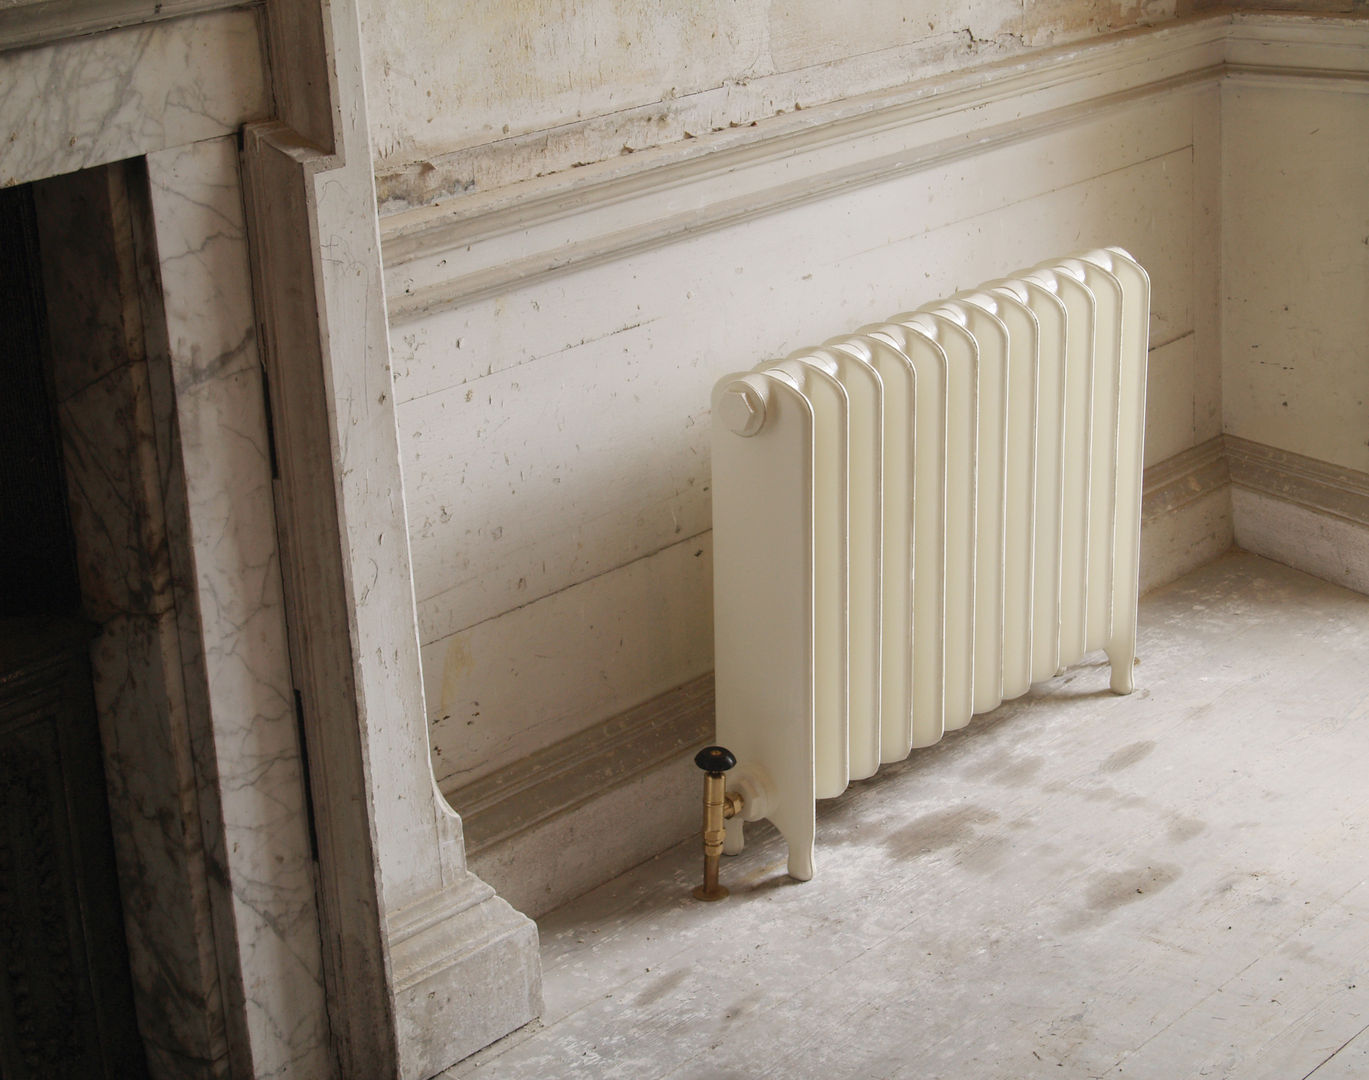 The Eton Cast Iron Radiator is available from UKAA UKAA | UK Architectural Antiques Classic style bathroom Fittings